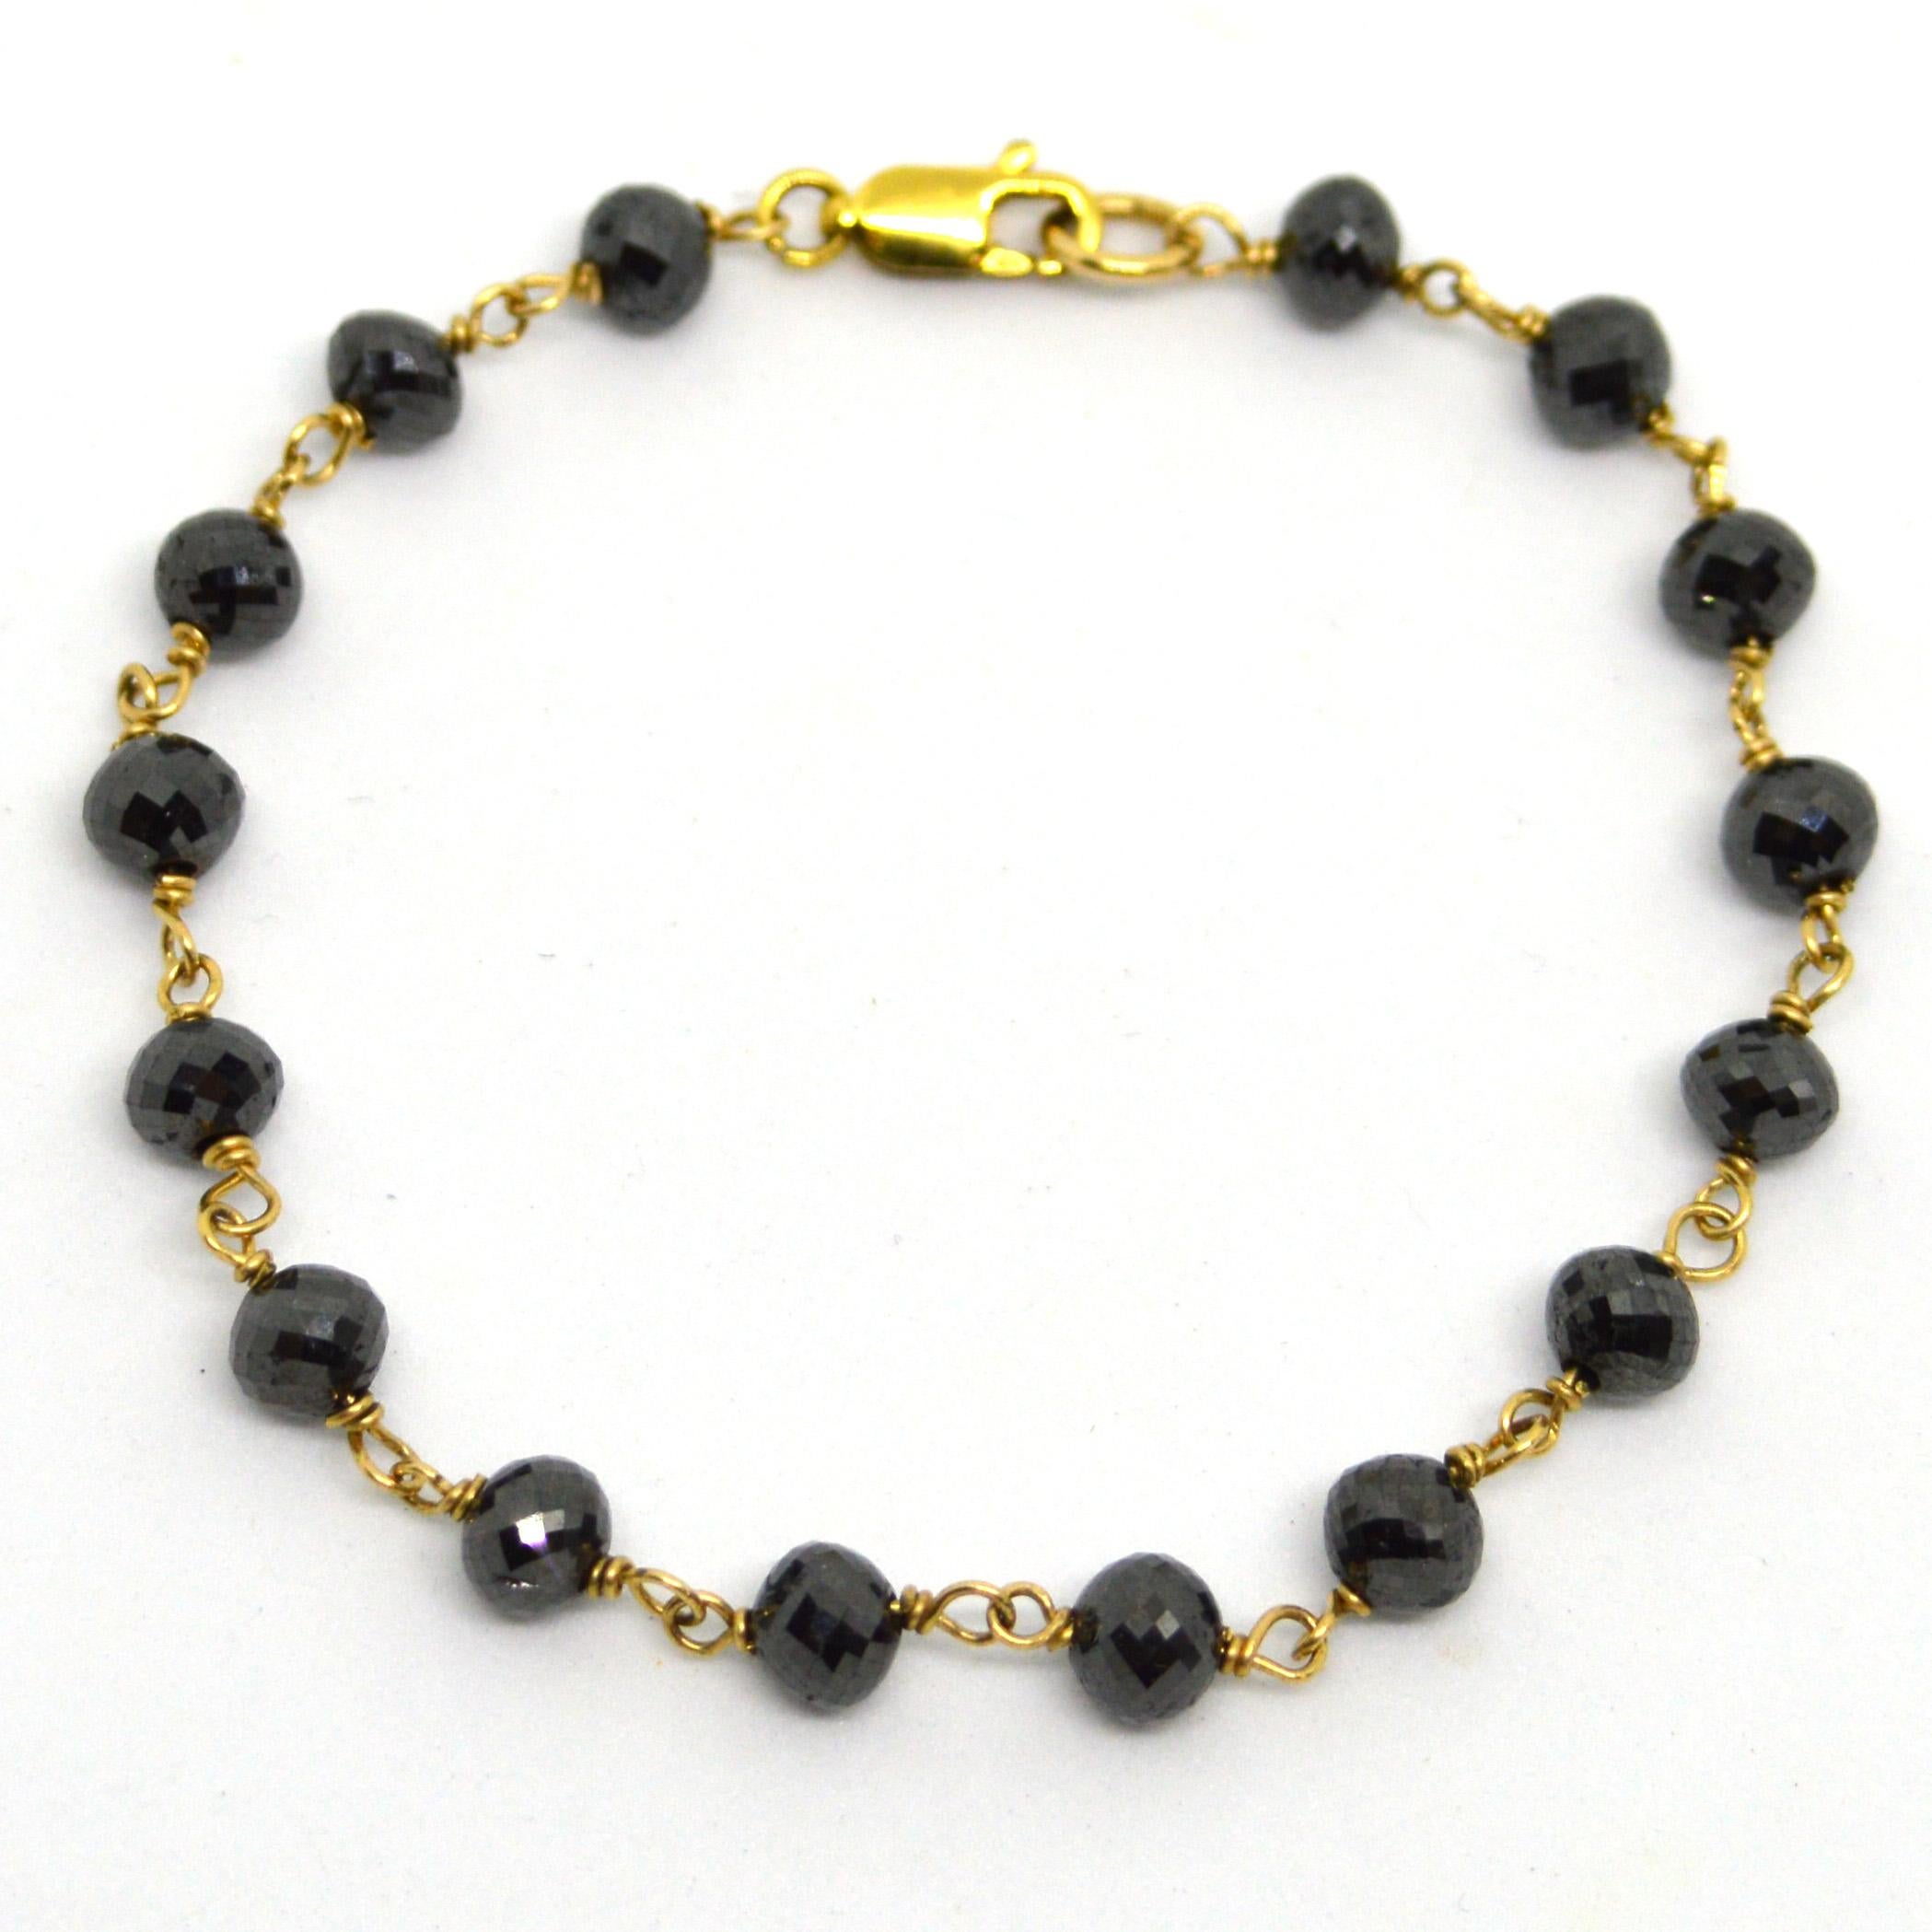 Superior multi-faceted 16 x 1ct Black Diamond hand made bracelet, each stone measures approx 5.6 x 5mm and has a beautiful sparkle.  Hand wire wrapped on 14k gold filled wire for strength with a 14k Gold filled clasp.
Finished Bracelet measures